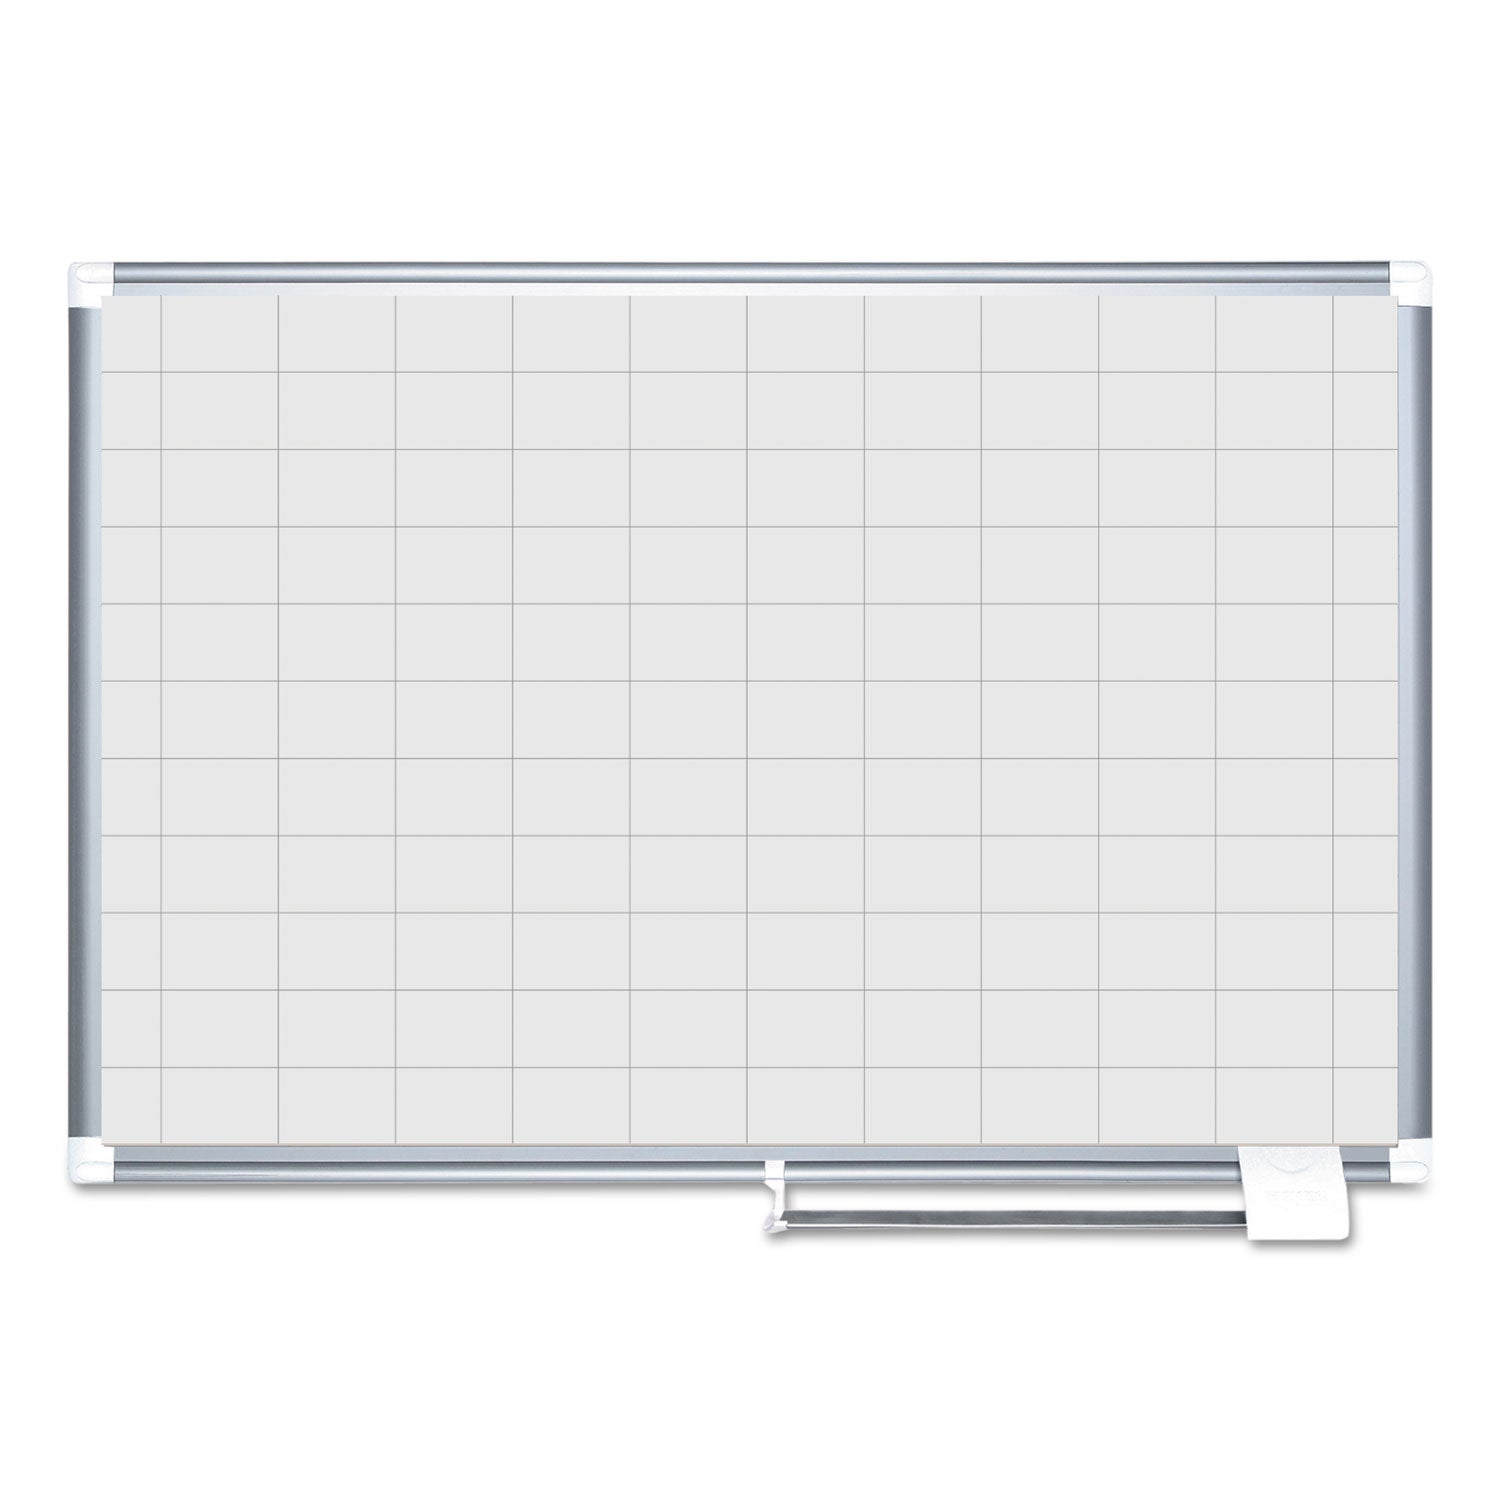 Gridded Magnetic Steel Dry Erase Planning Board, 2 x 3 Grid, 48 x 36, White Surface, Silver Aluminum Frame - 